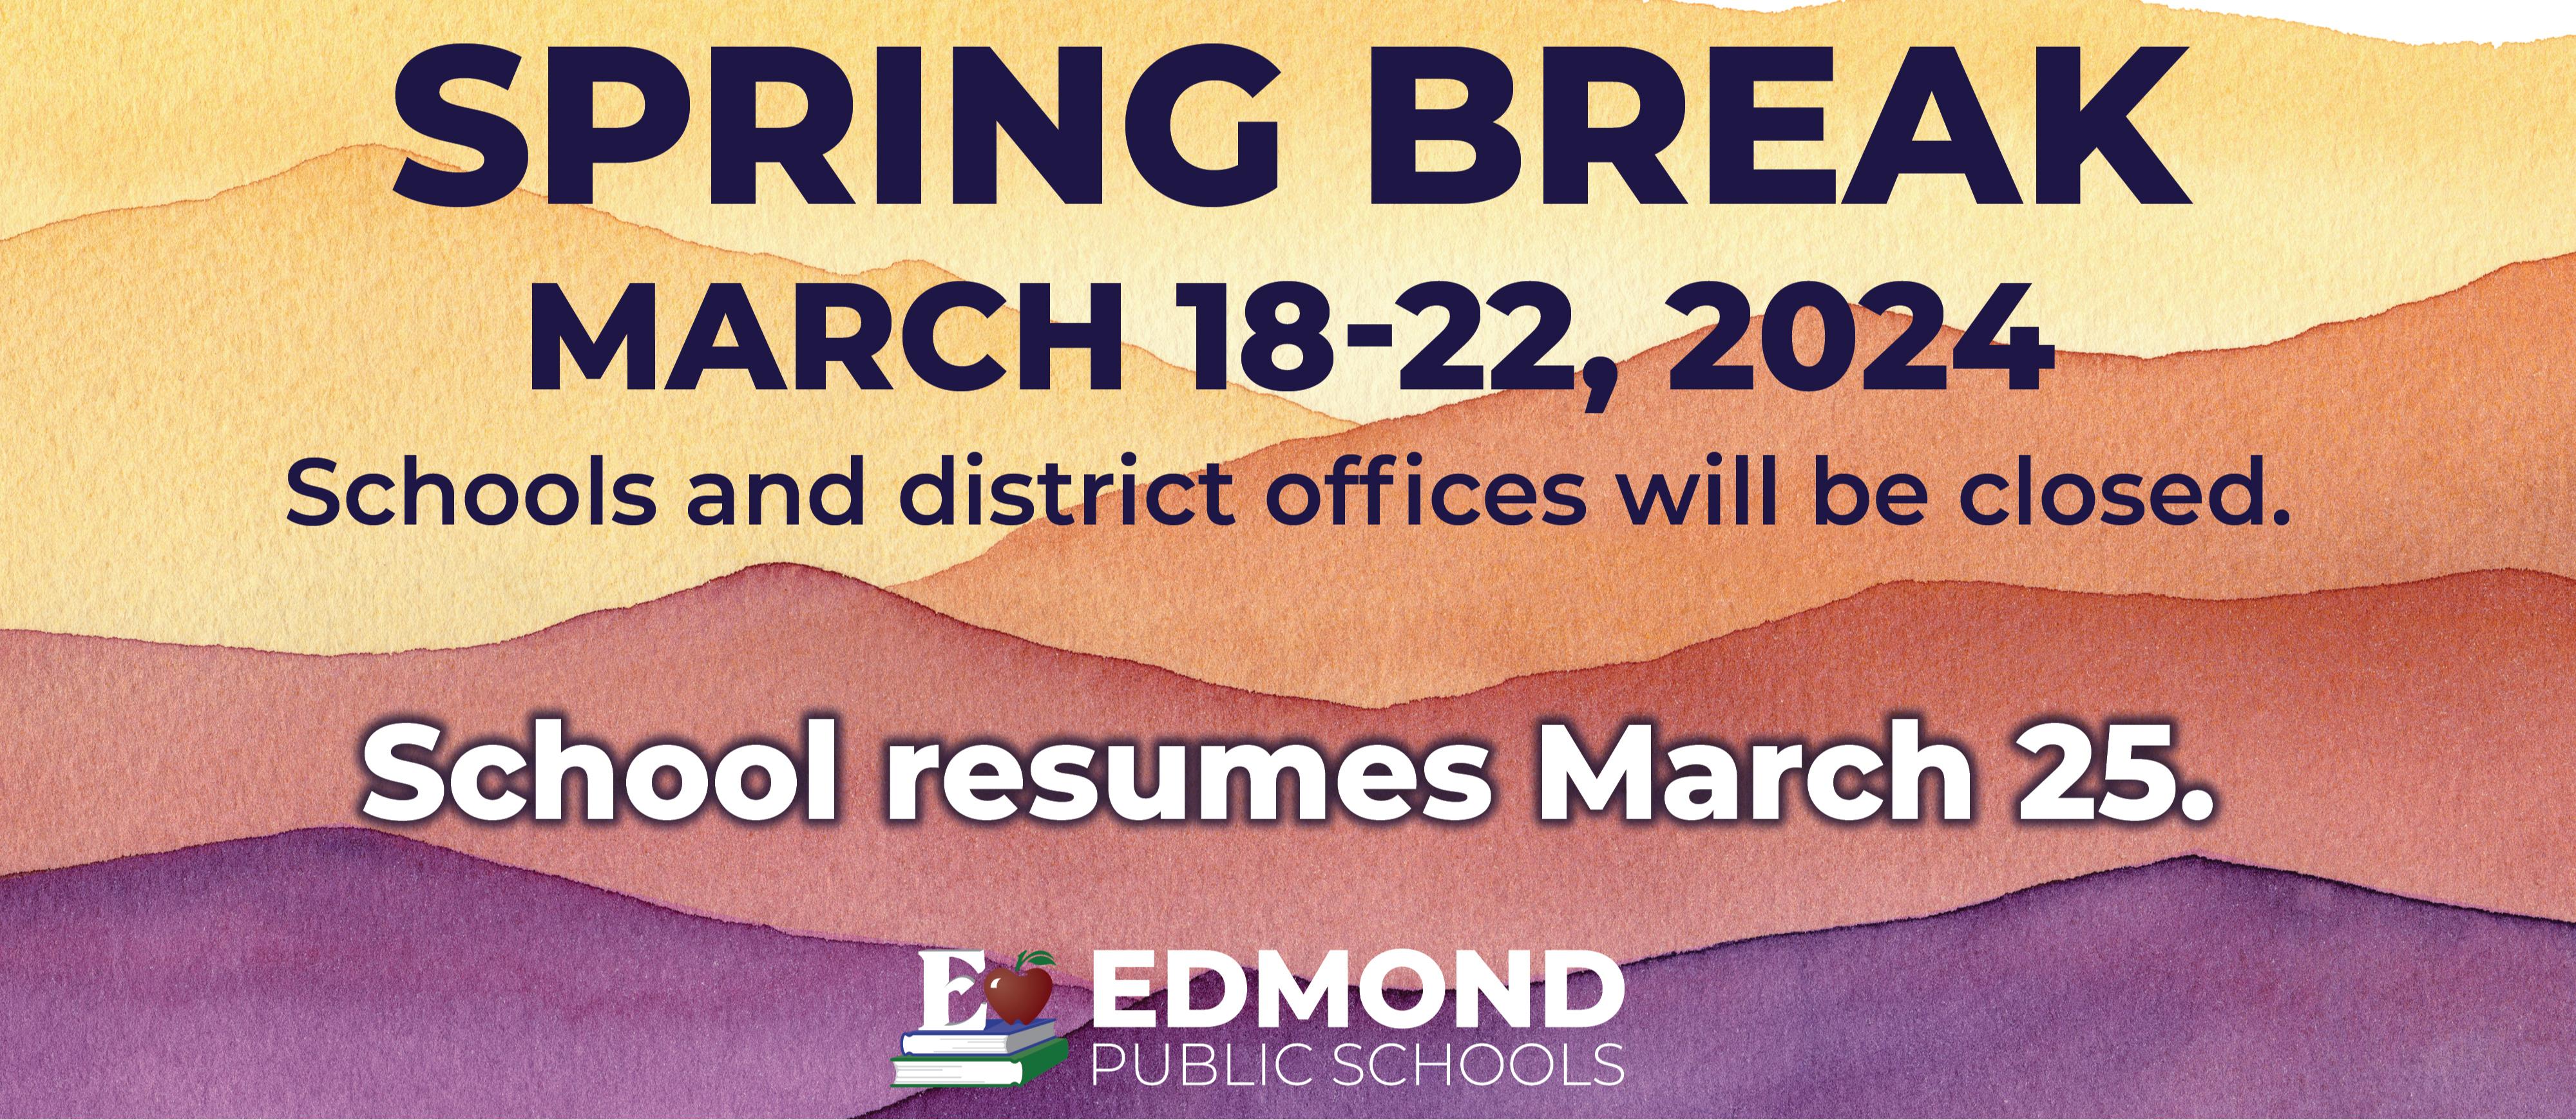 Spring break March 18-22, 2024. Schools and offices will be closed. School resumes March 25. Edmond Public Schools